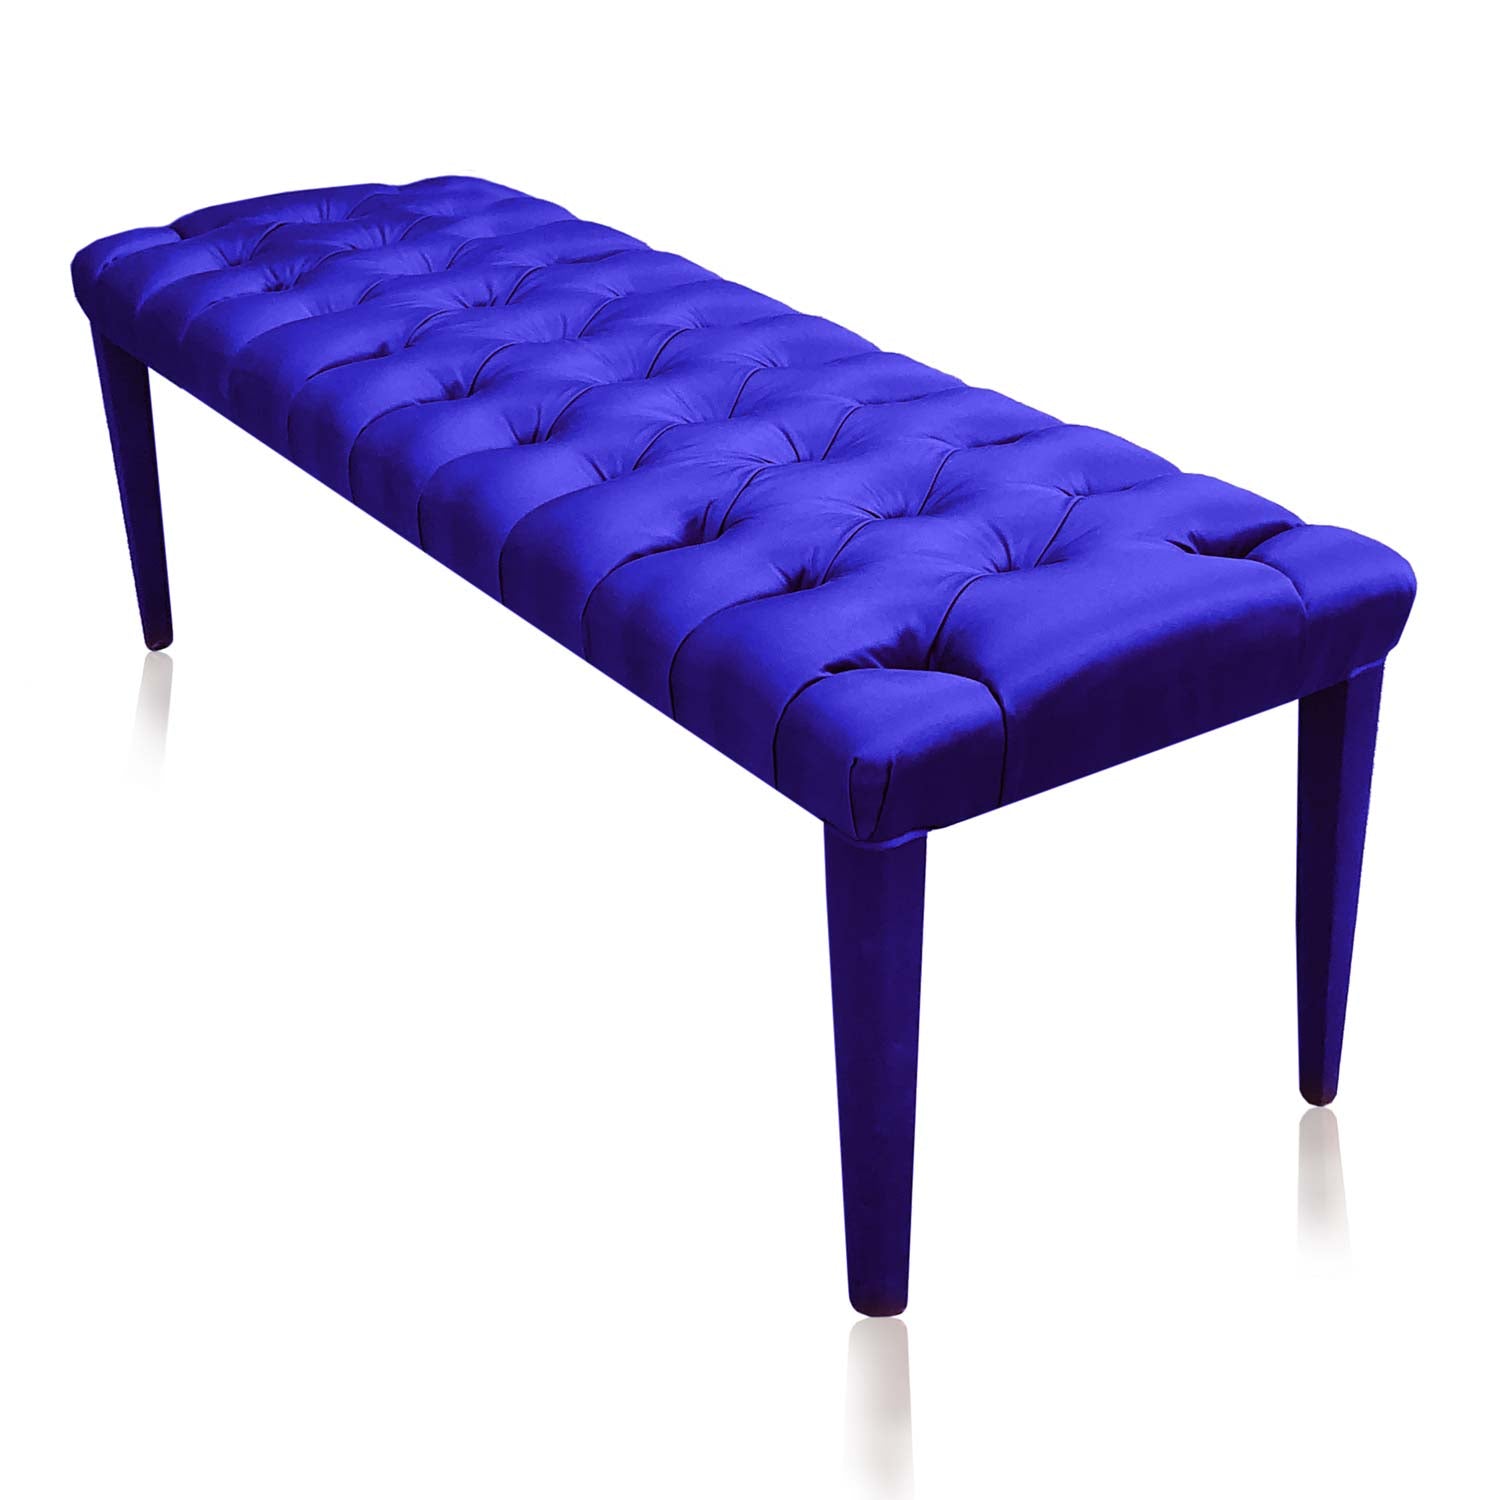 Versatile Ottoman Bench for End of Bed